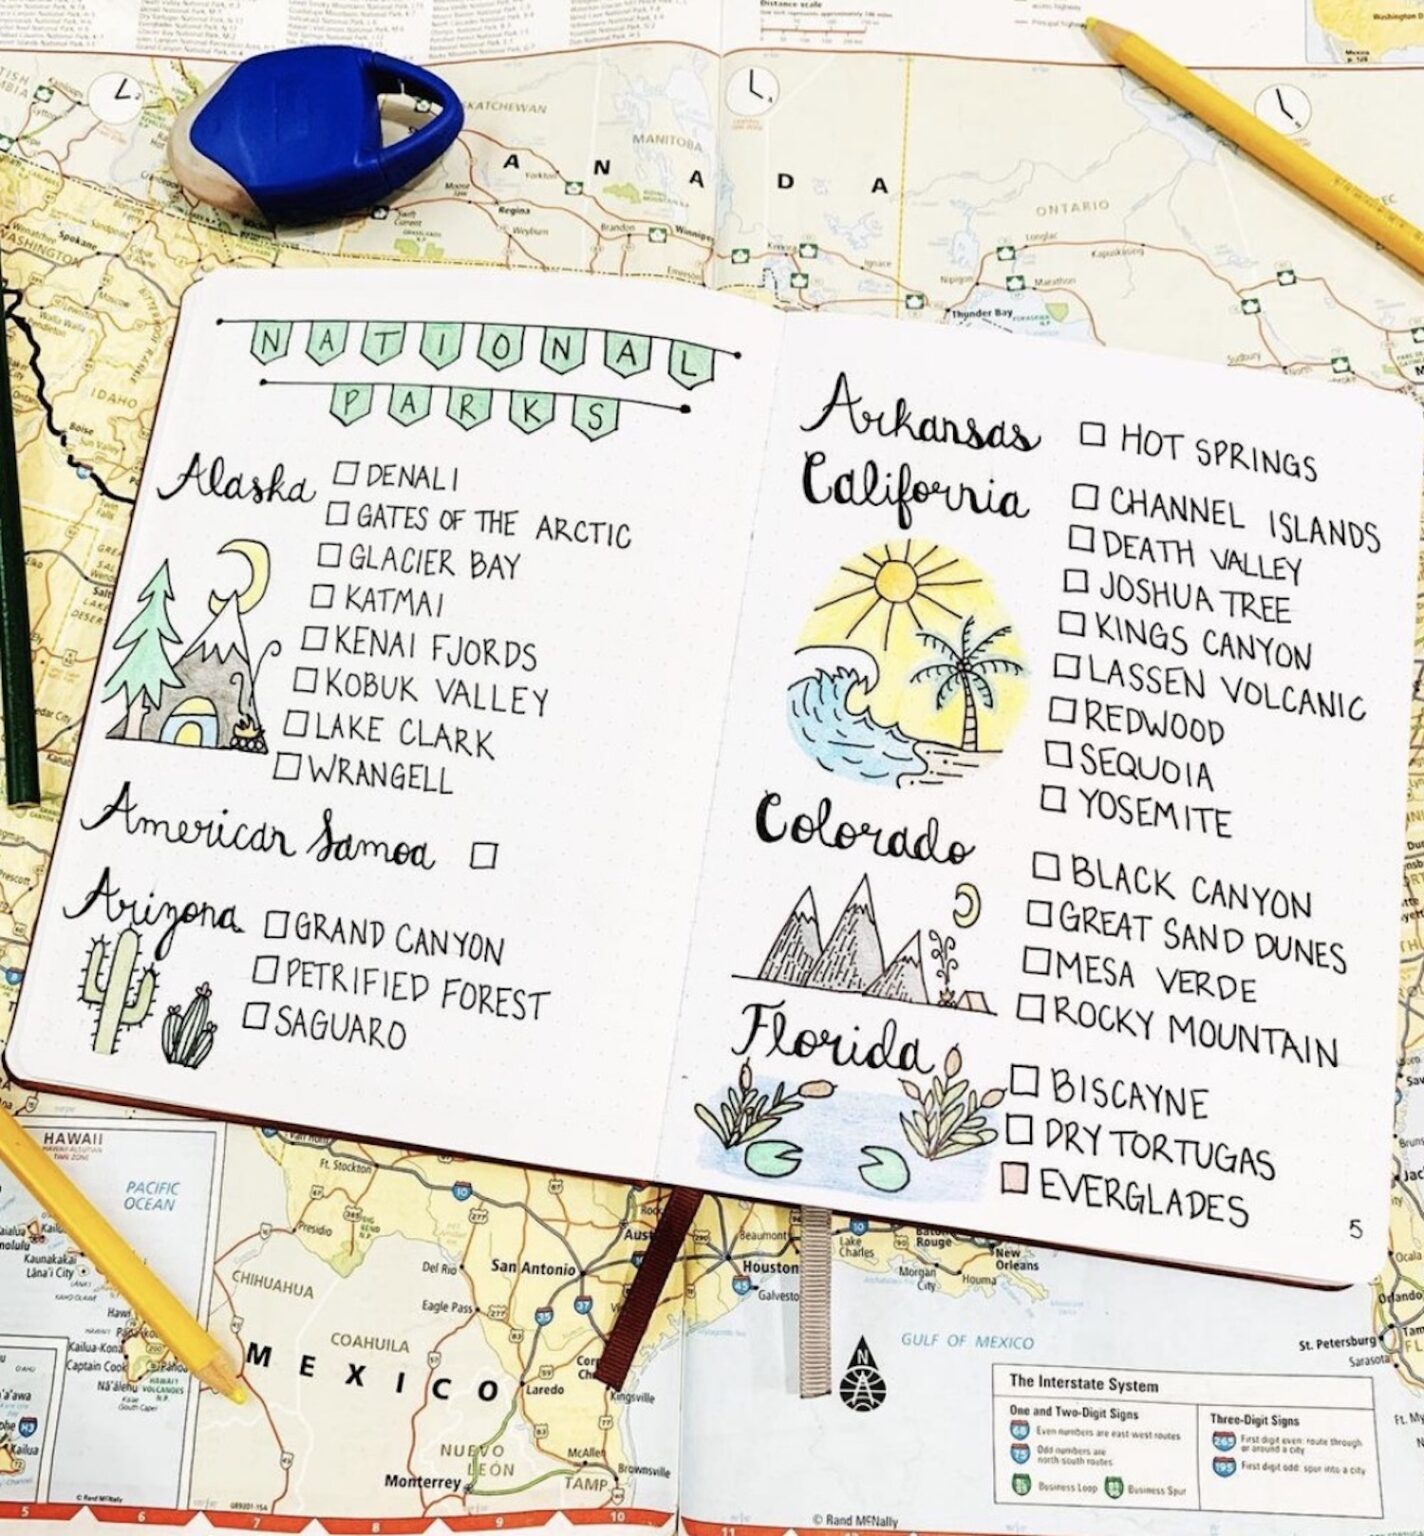 The Best Creative Travel Bullet Journal Ideas For Your Next Adventure